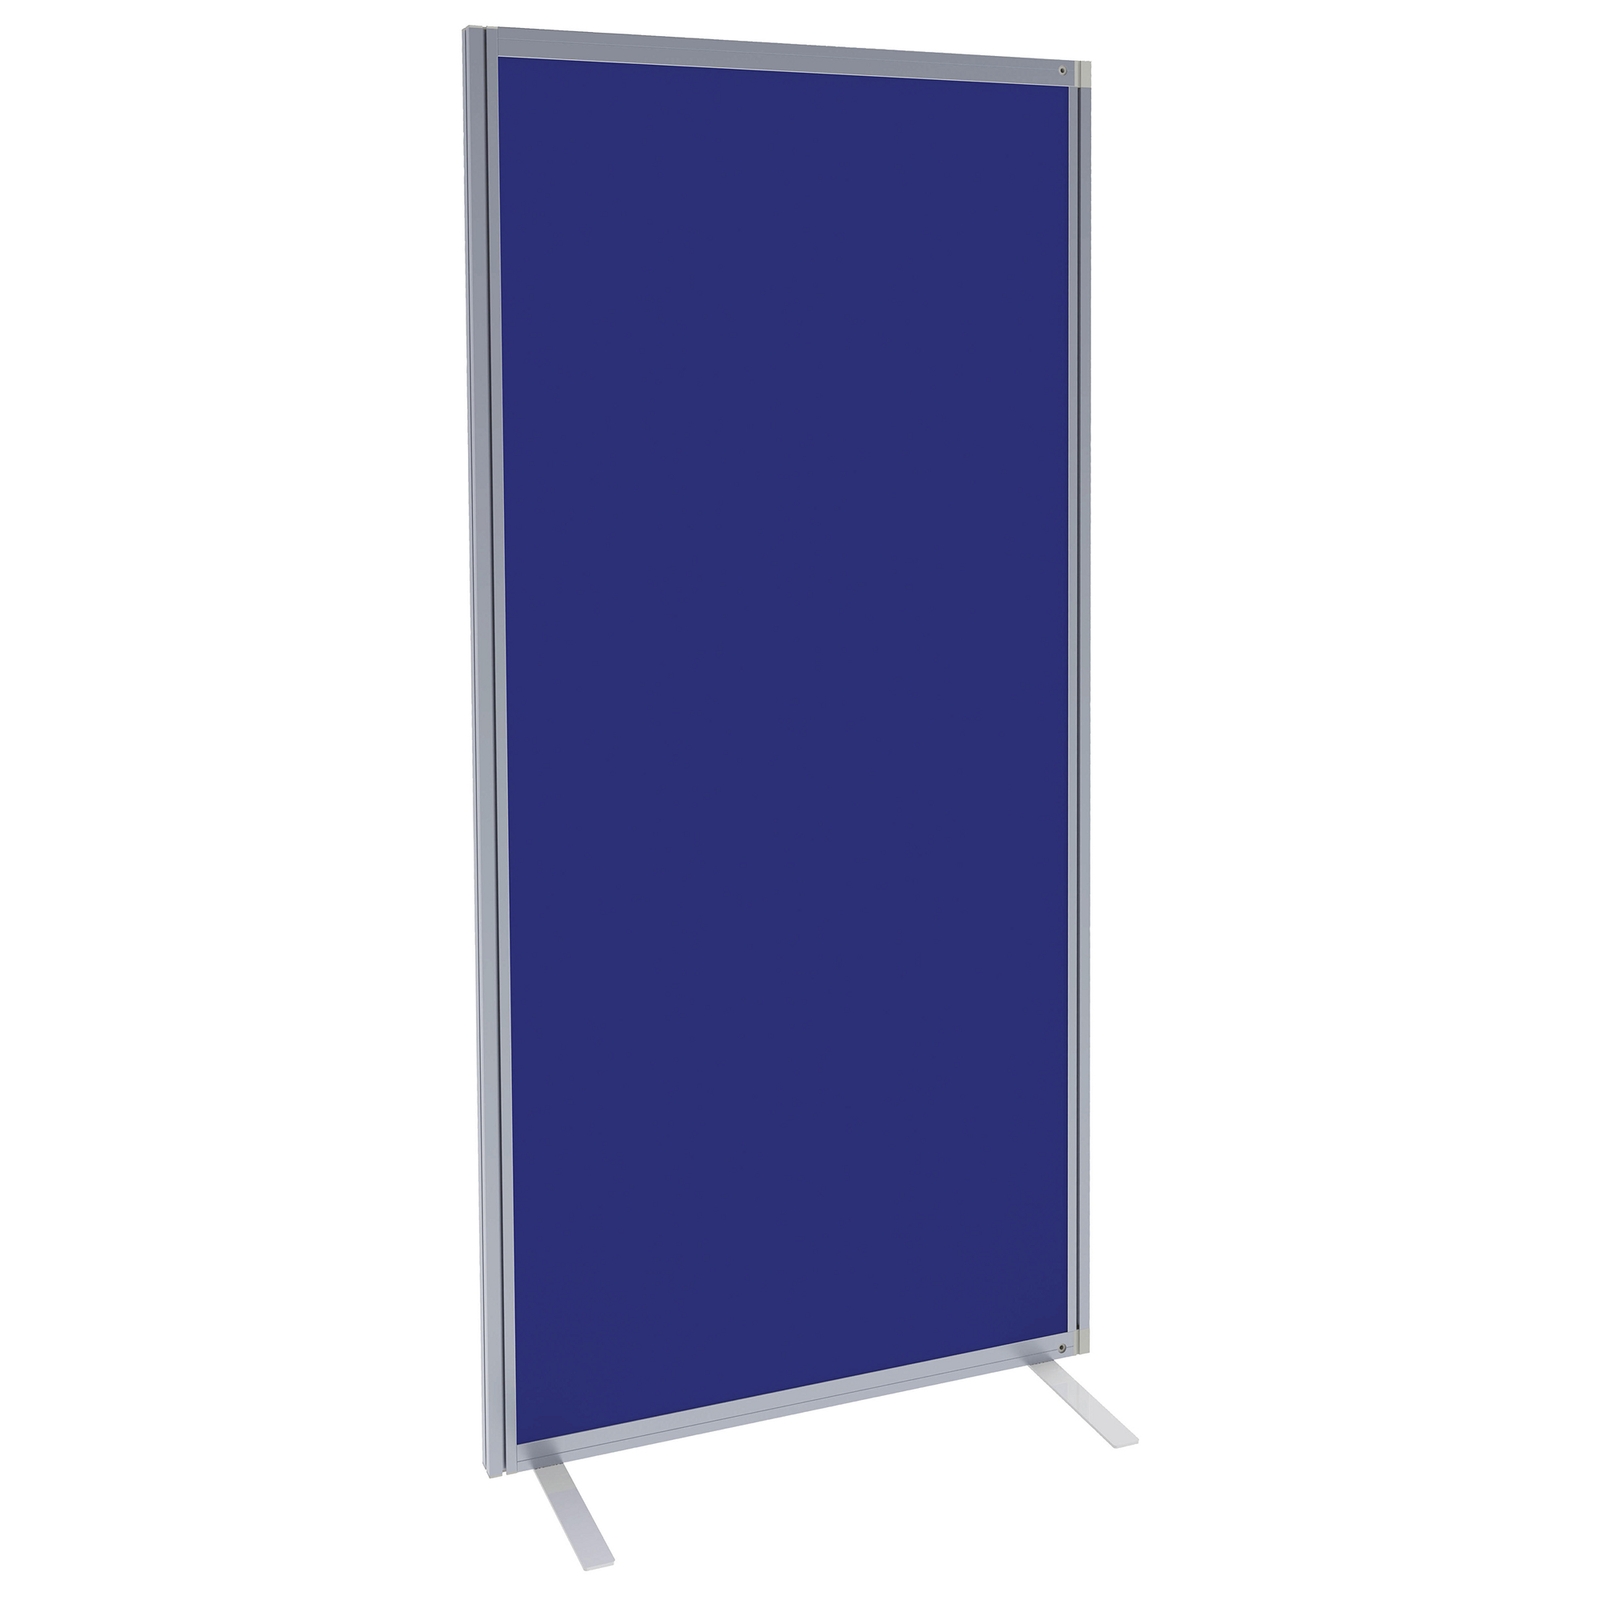 Additional Panel Gallery Display System -  Additional Panel - 90x180